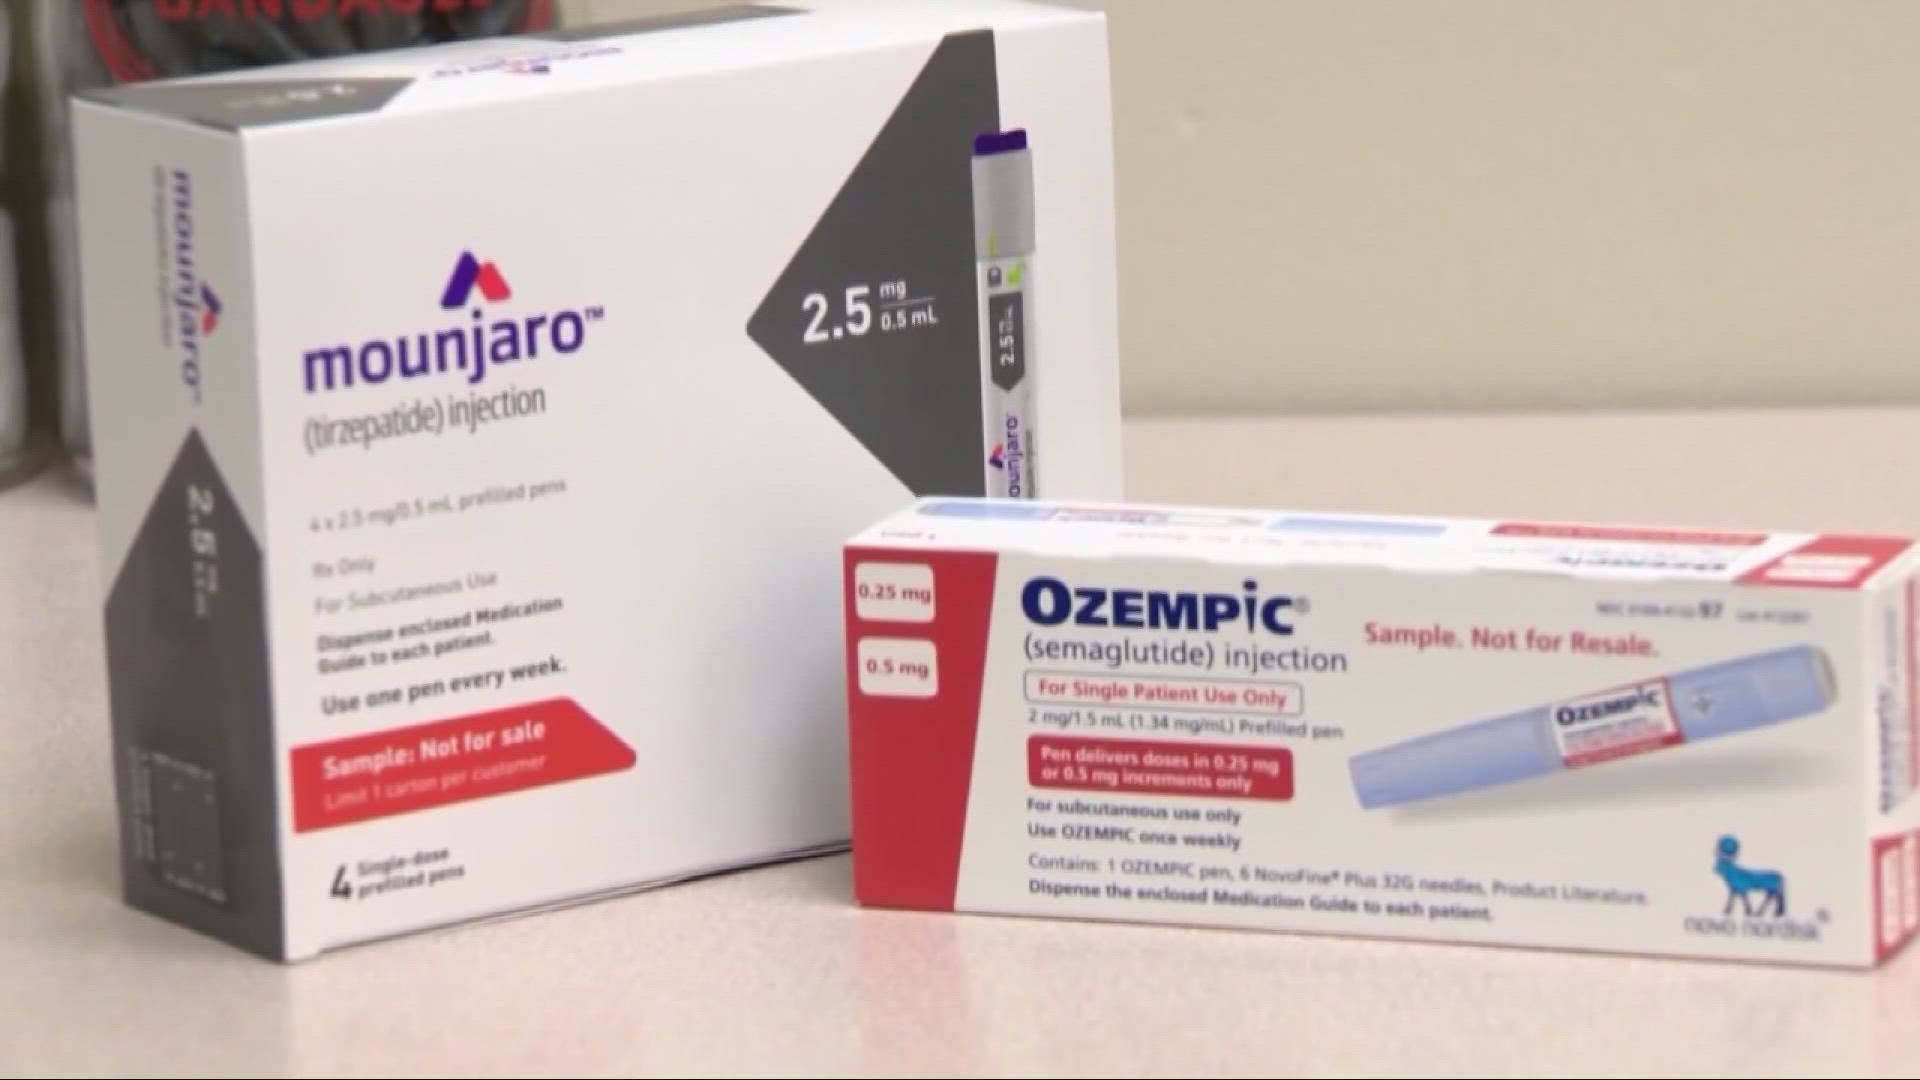 The FDA has issued a new warning to patients taking the medications Ozempic and Wegovy for Type 2 diabetes. Knockoff versions are being sold nationwide.